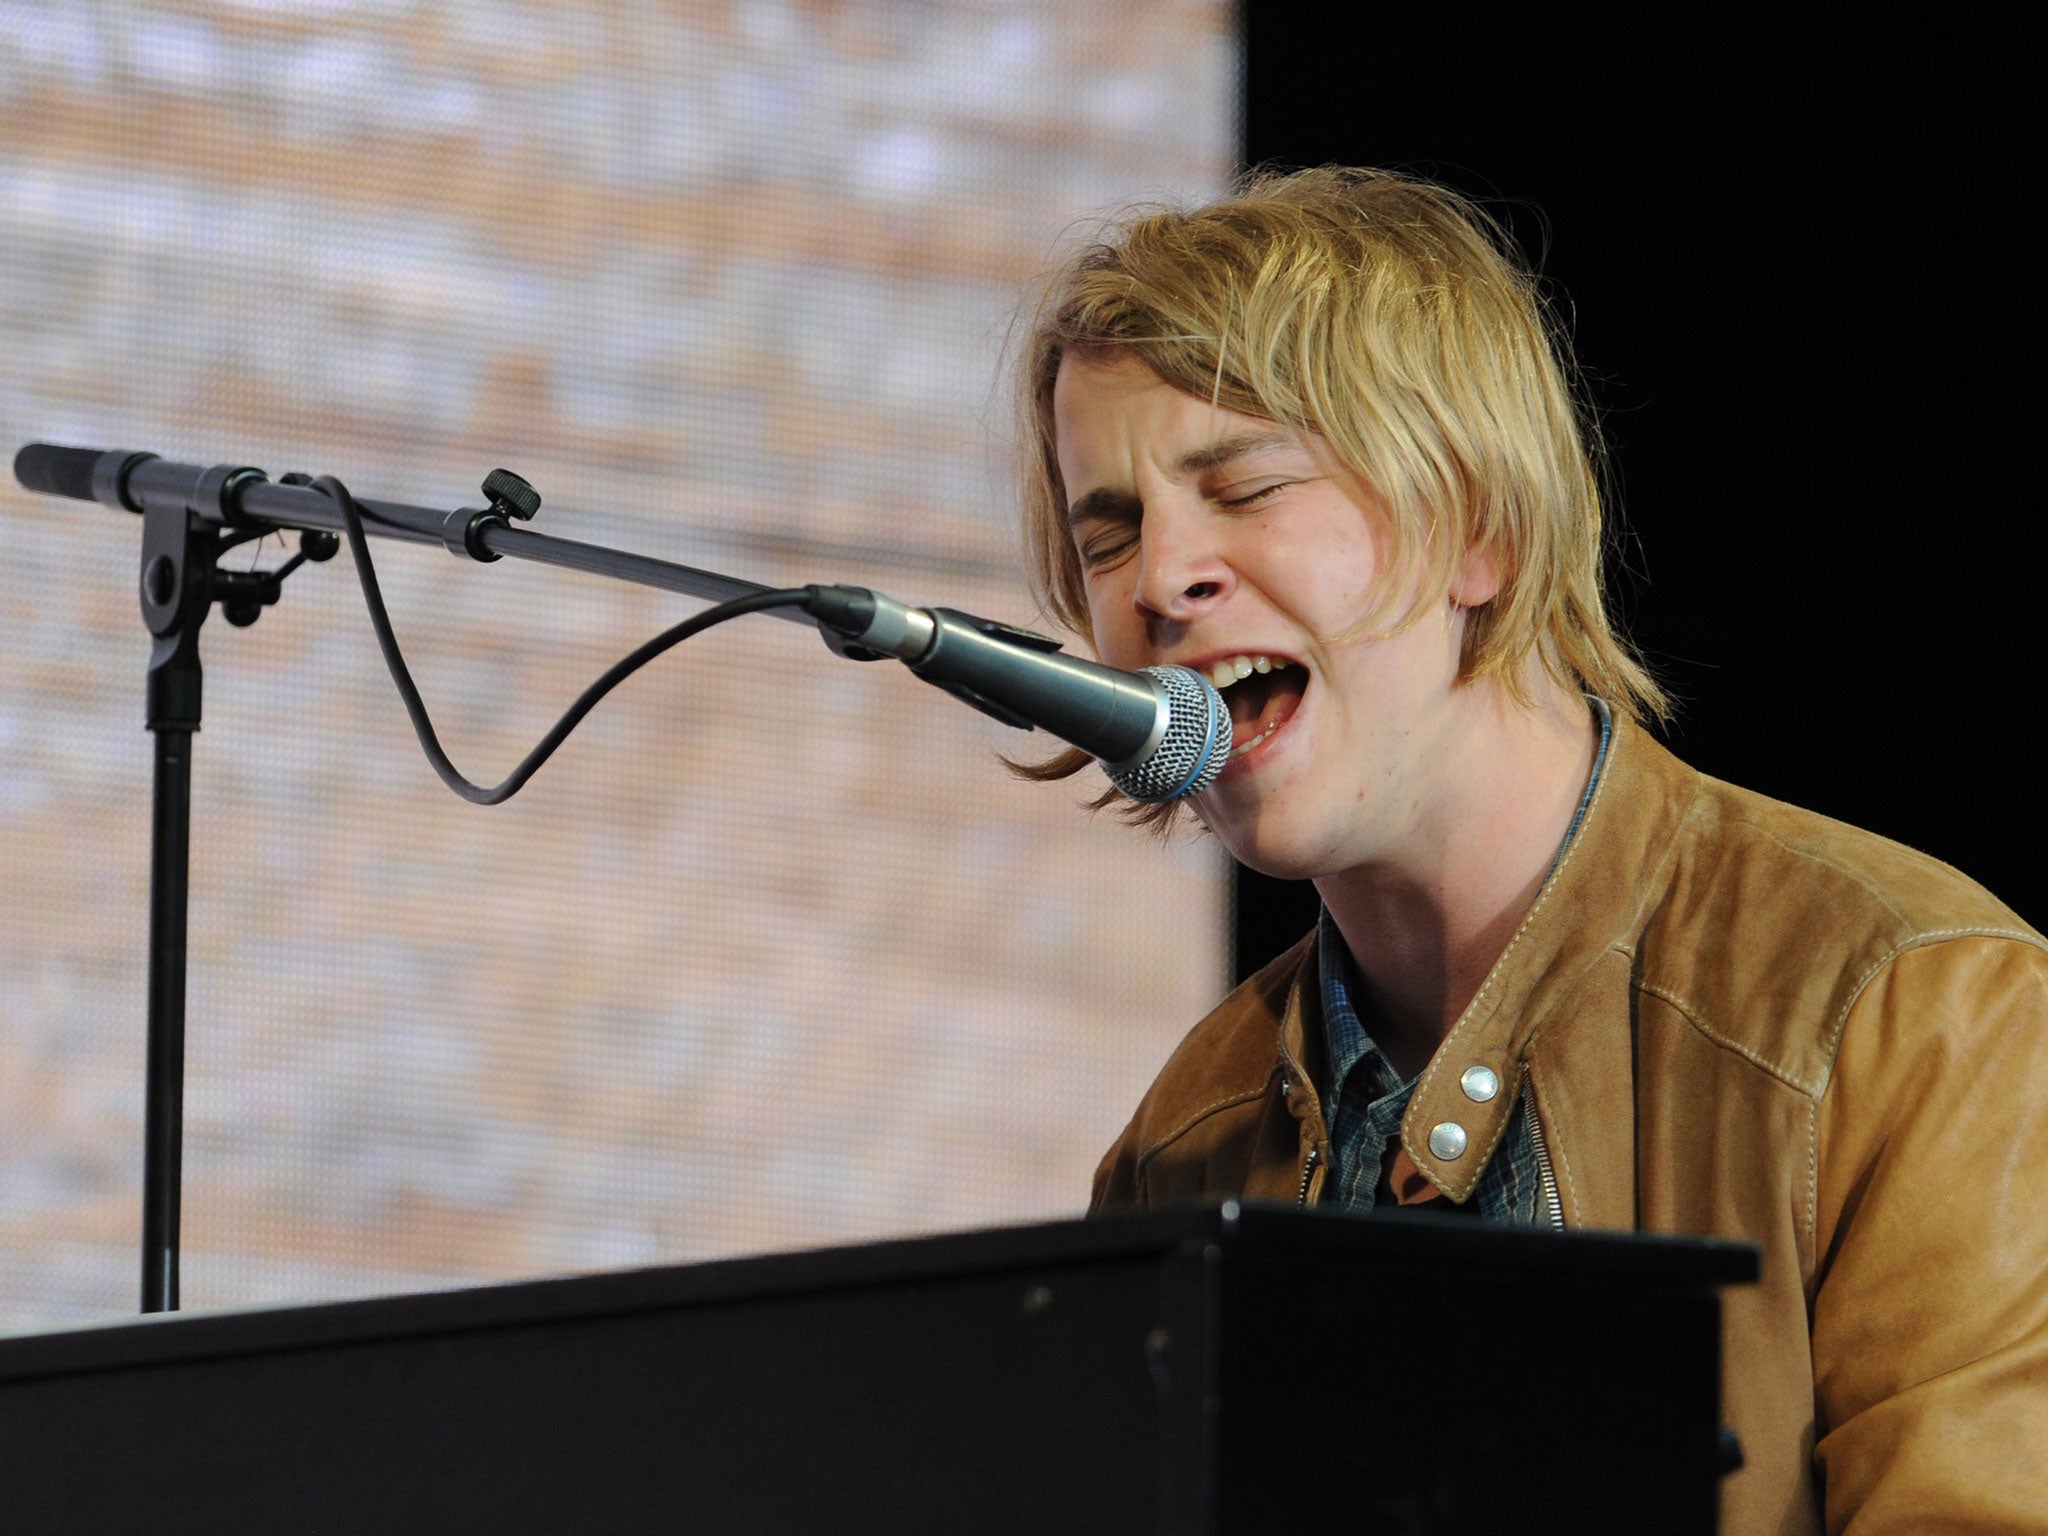 Tom Odell has recorded a cover of John Lennon's 'Real Love' for the John Lewis Christmas advert 2014